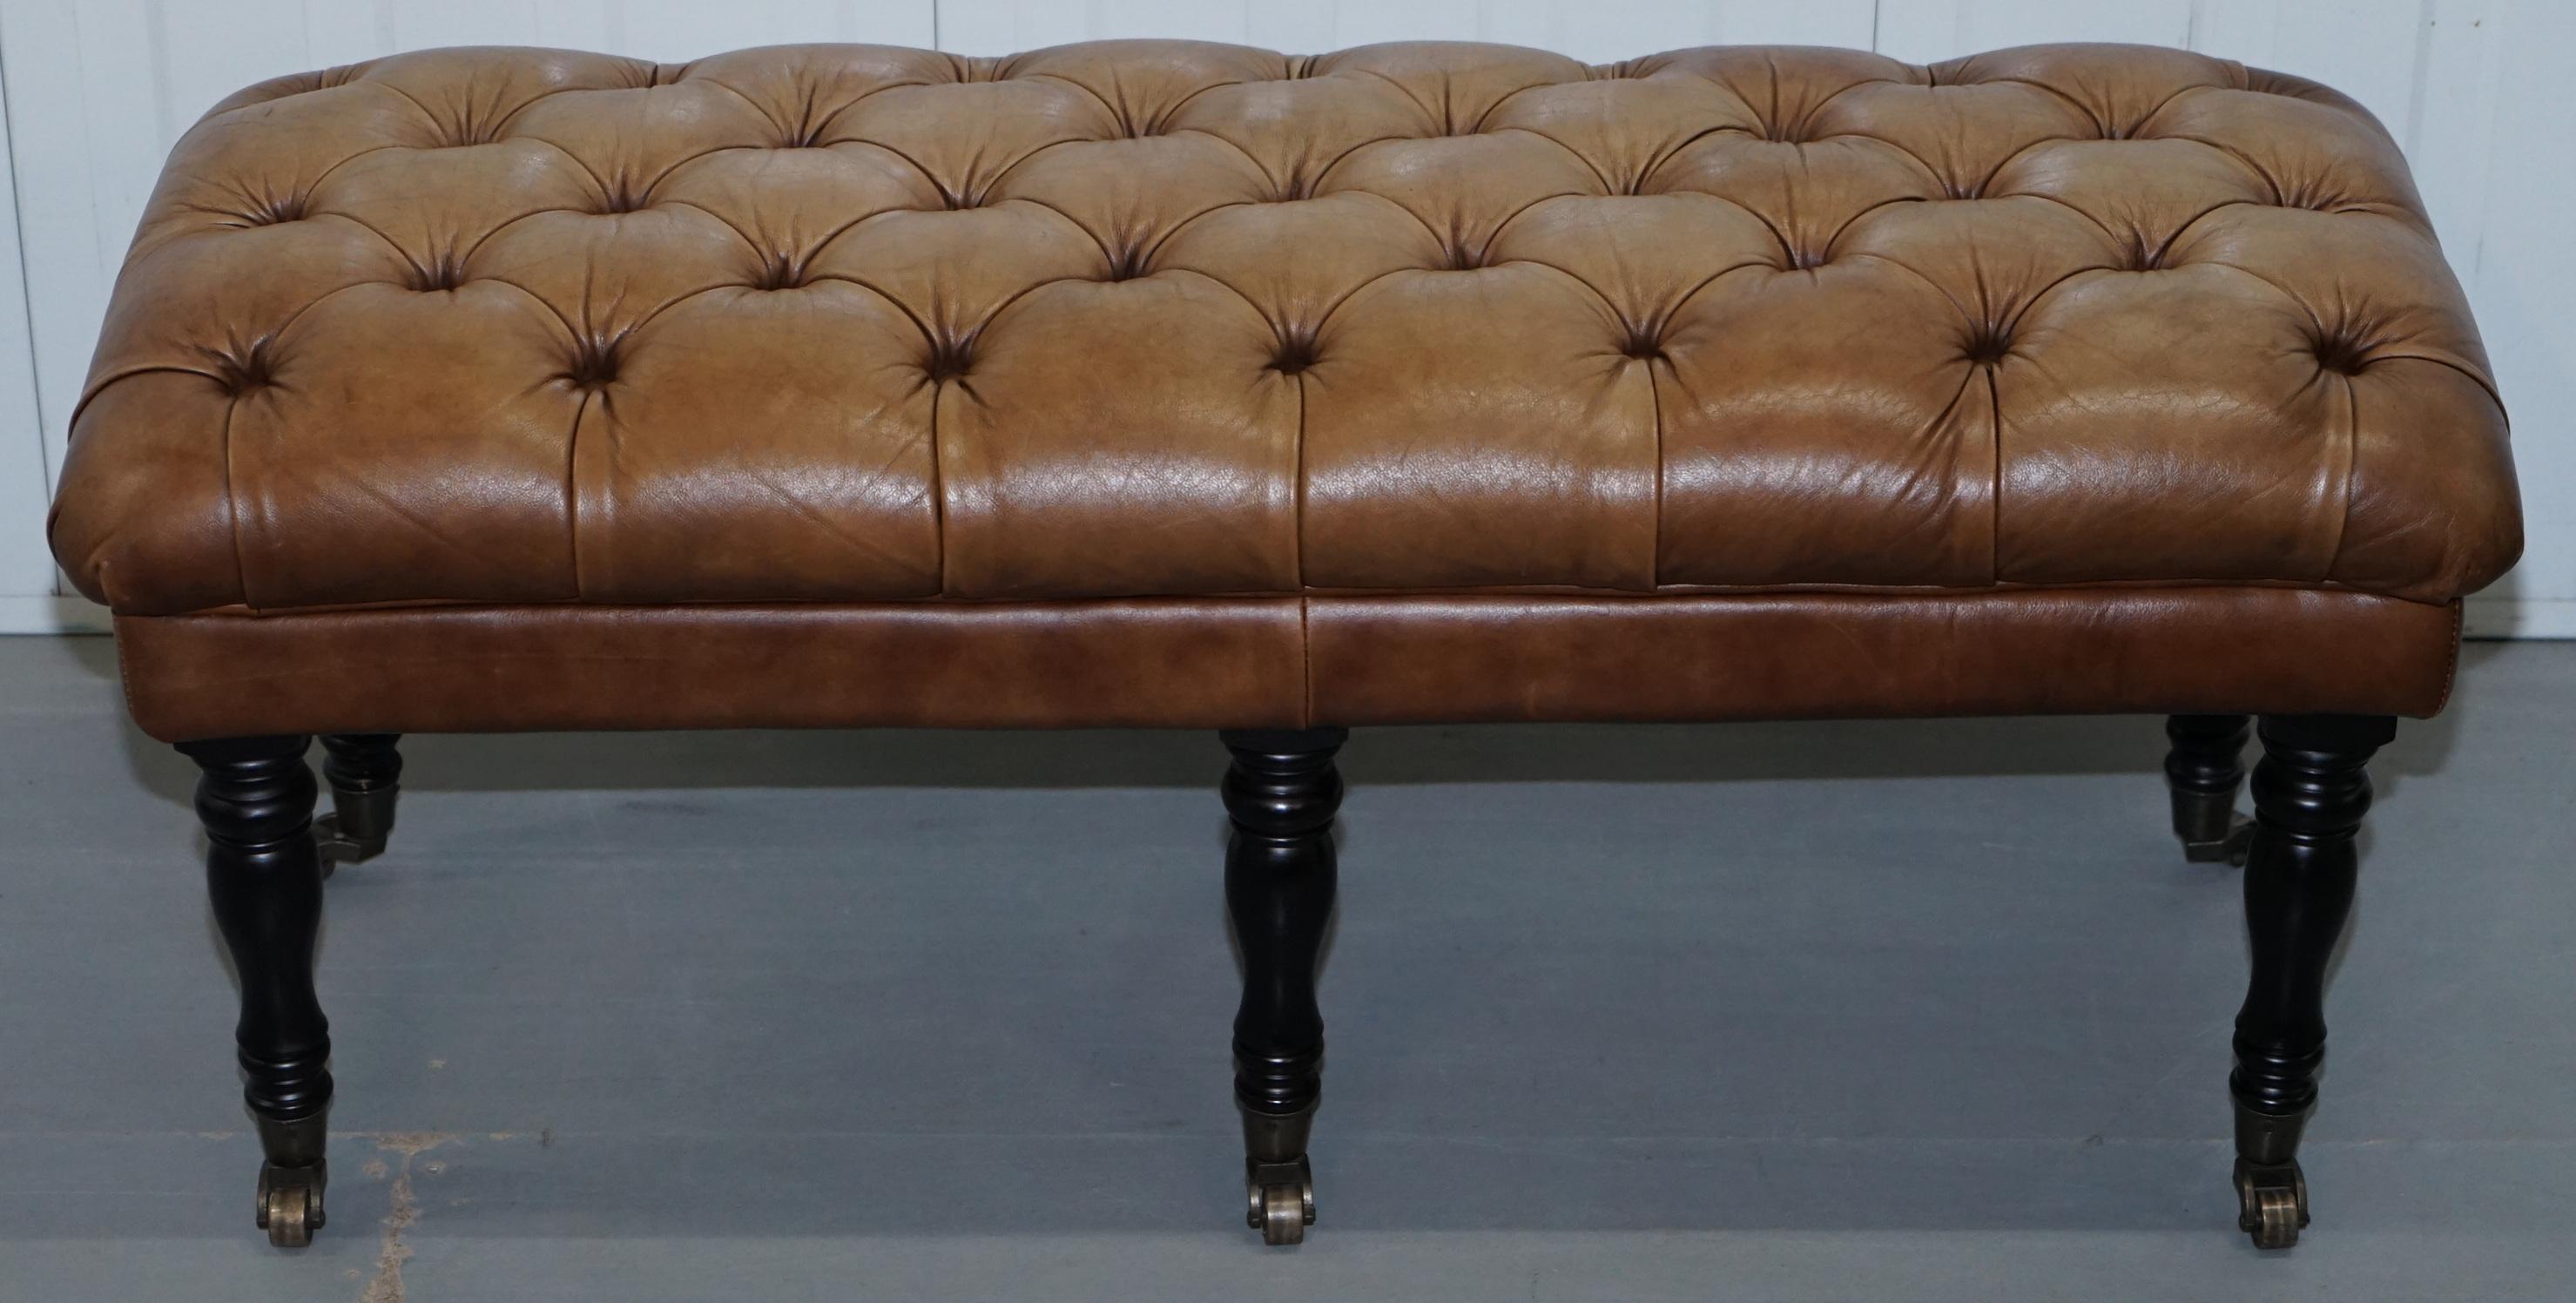 We are delighted to offer for sale this very nice Chesterfield aged tan brown leather bench stool

A good looking well made and decorative piece, ideally suited as a bench seat perhaps for a bay window or can be used as a large footstool

We